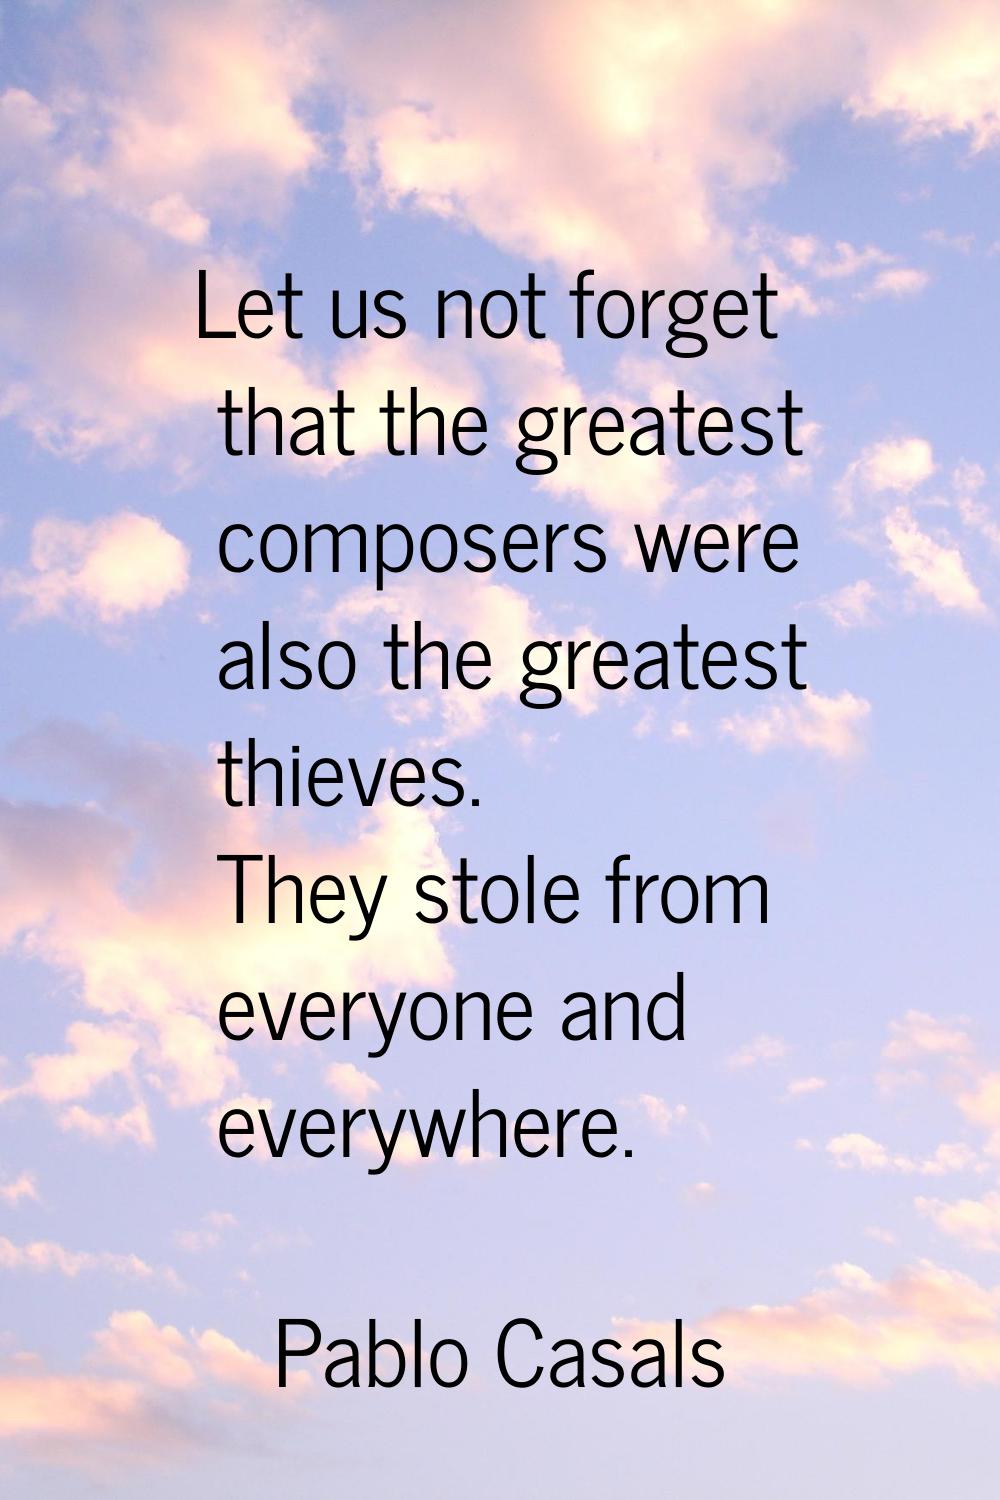 Let us not forget that the greatest composers were also the greatest thieves. They stole from every